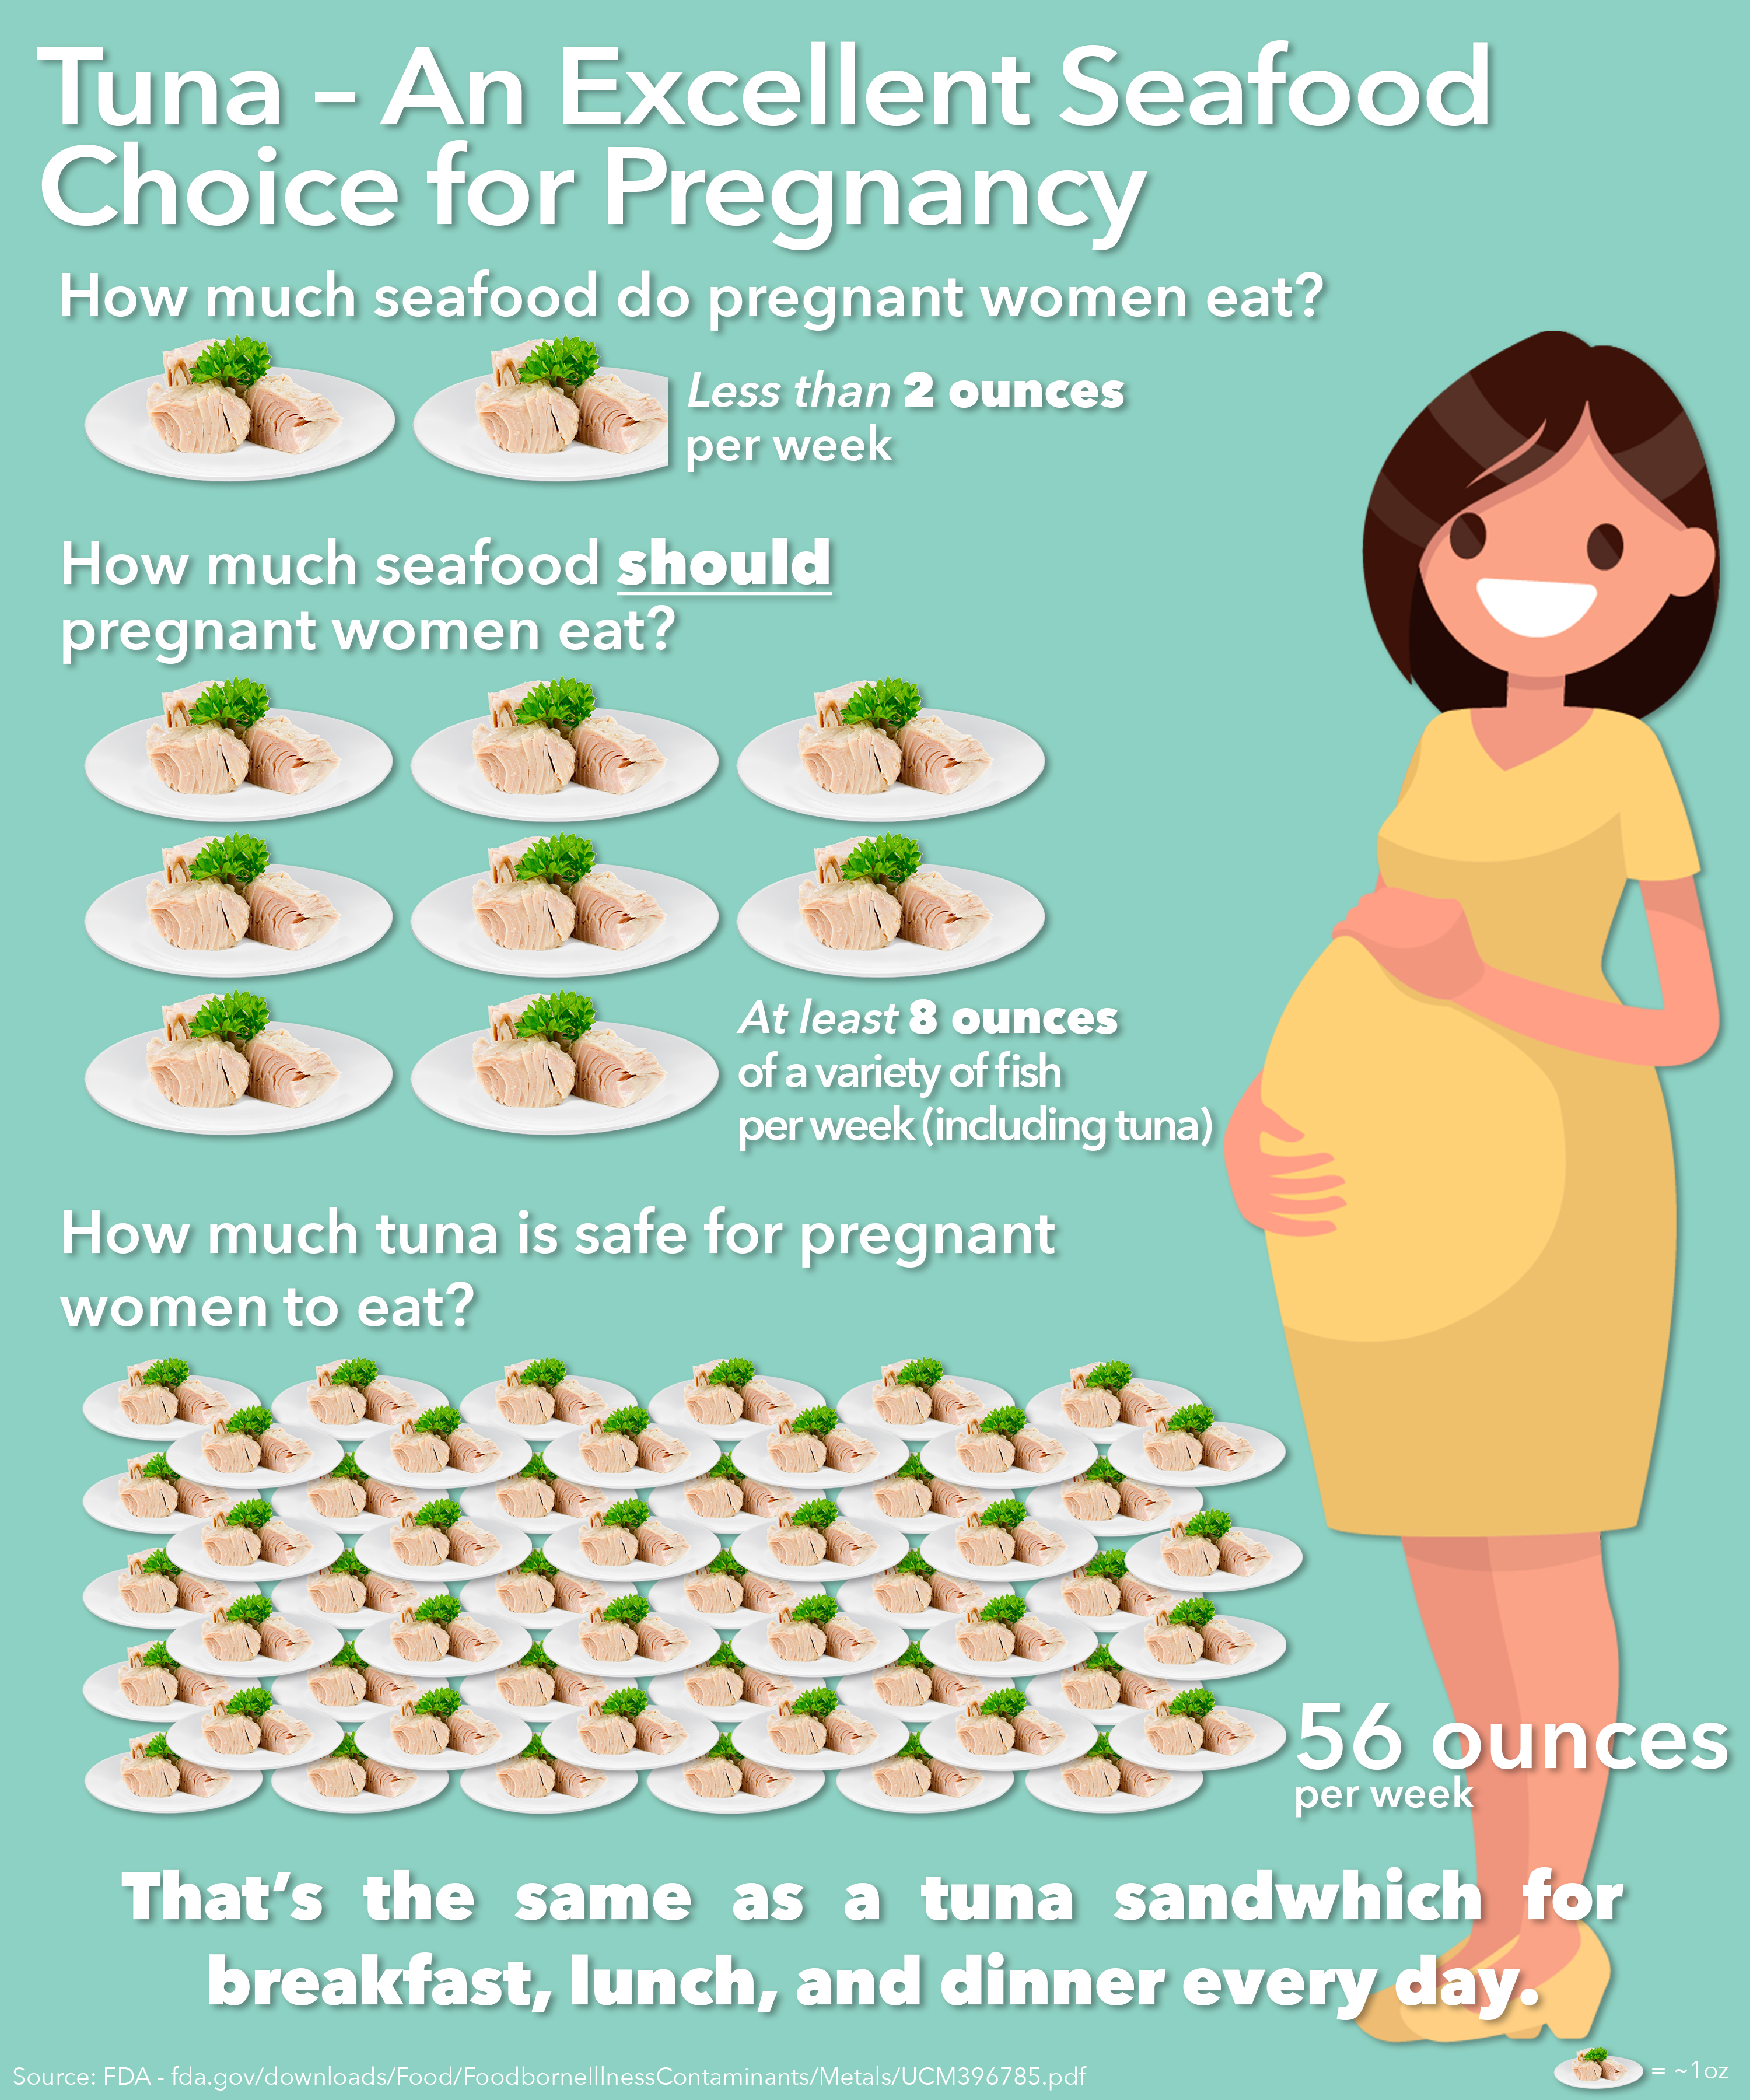 Can Pregnant Women Eat Tuna? - About Seafood